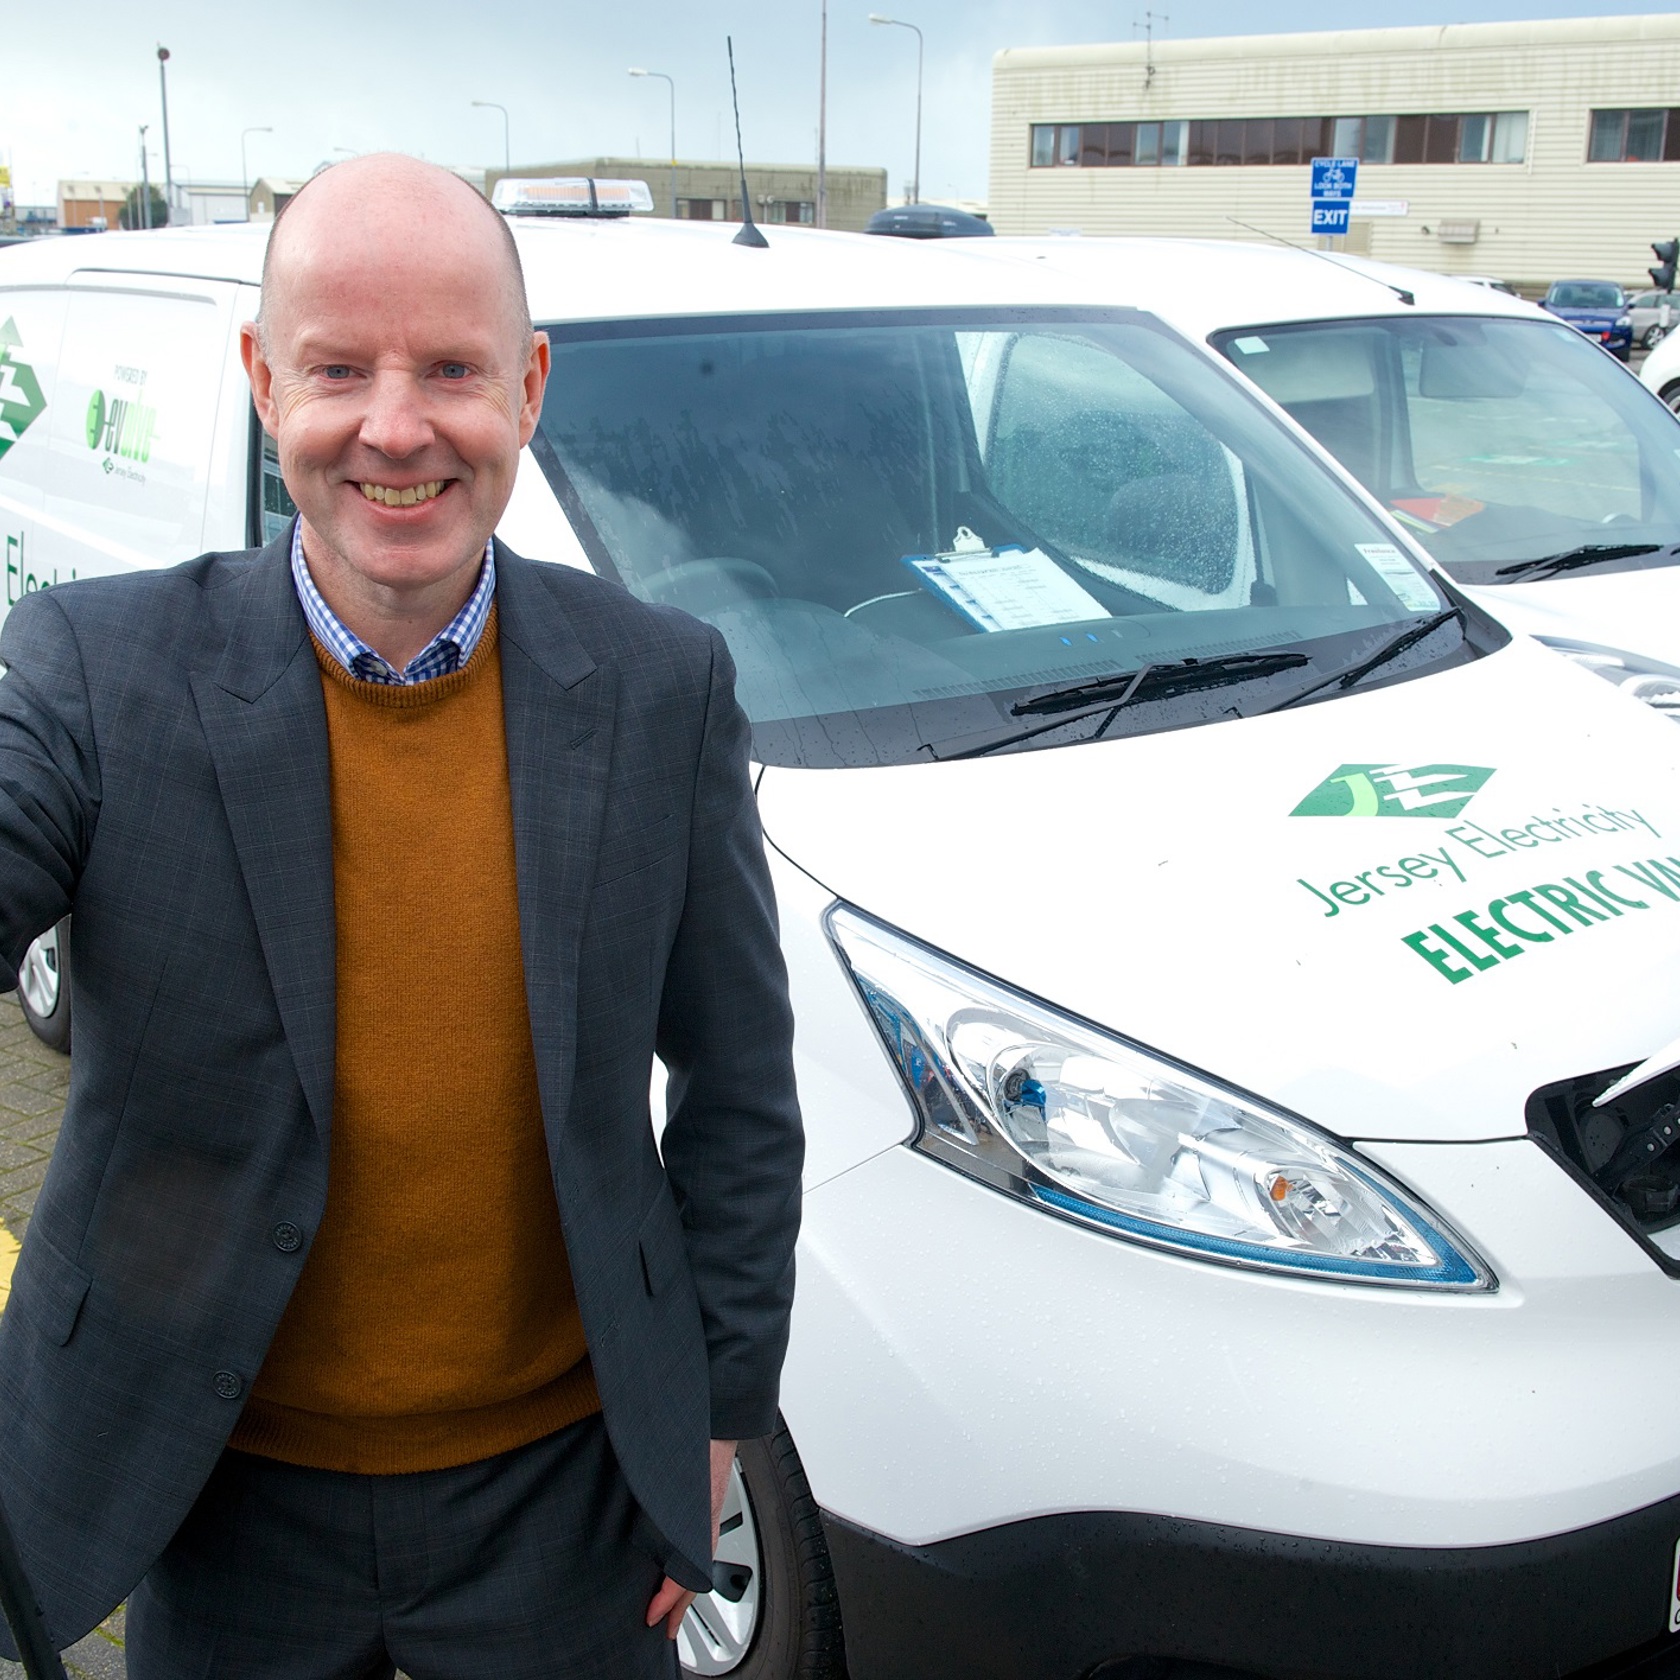 Mark Preece is pictured holding one of the Electric Vehicle charging plugs at La Collette.